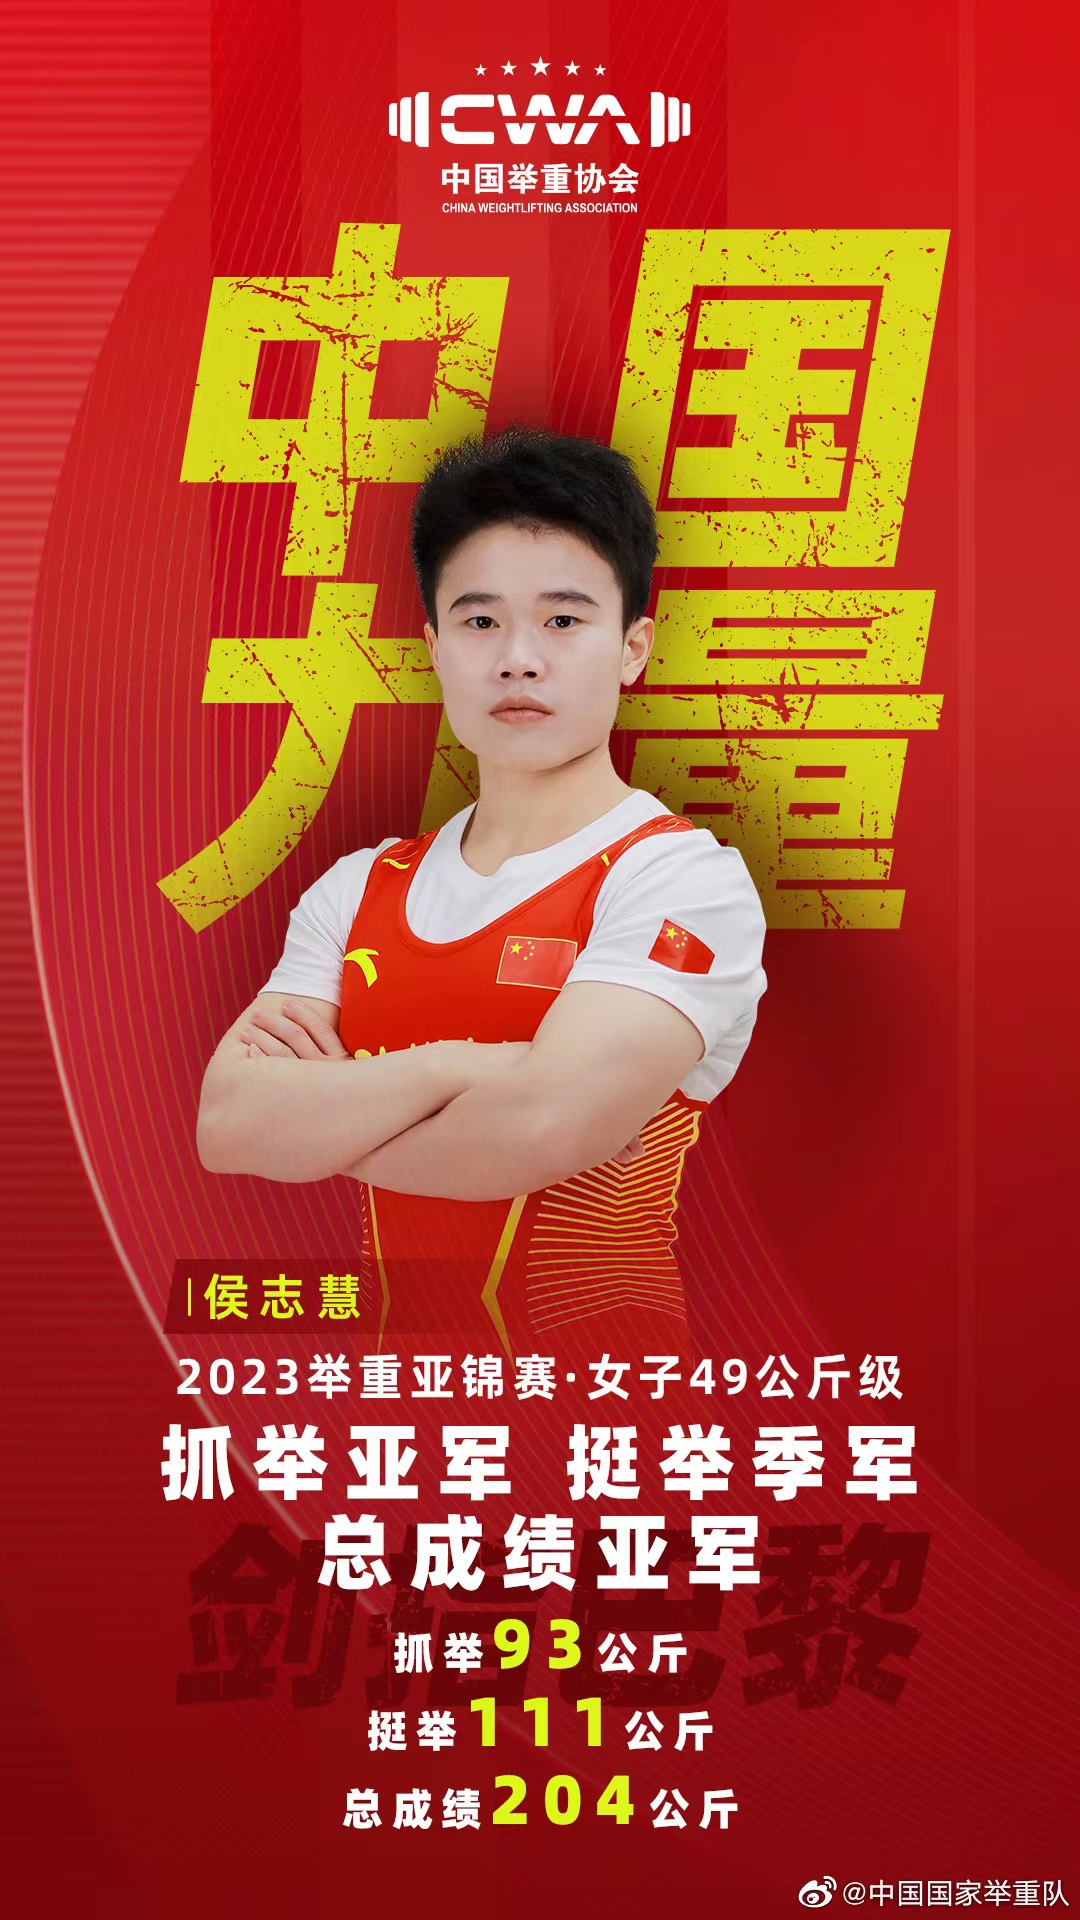 Chinese national weightlifting team's Weibo poster on May 5 honors Hou Zhihui's silver and bronze medals at the Asian Weightlifting Championships. /Chinese national weightlifting team